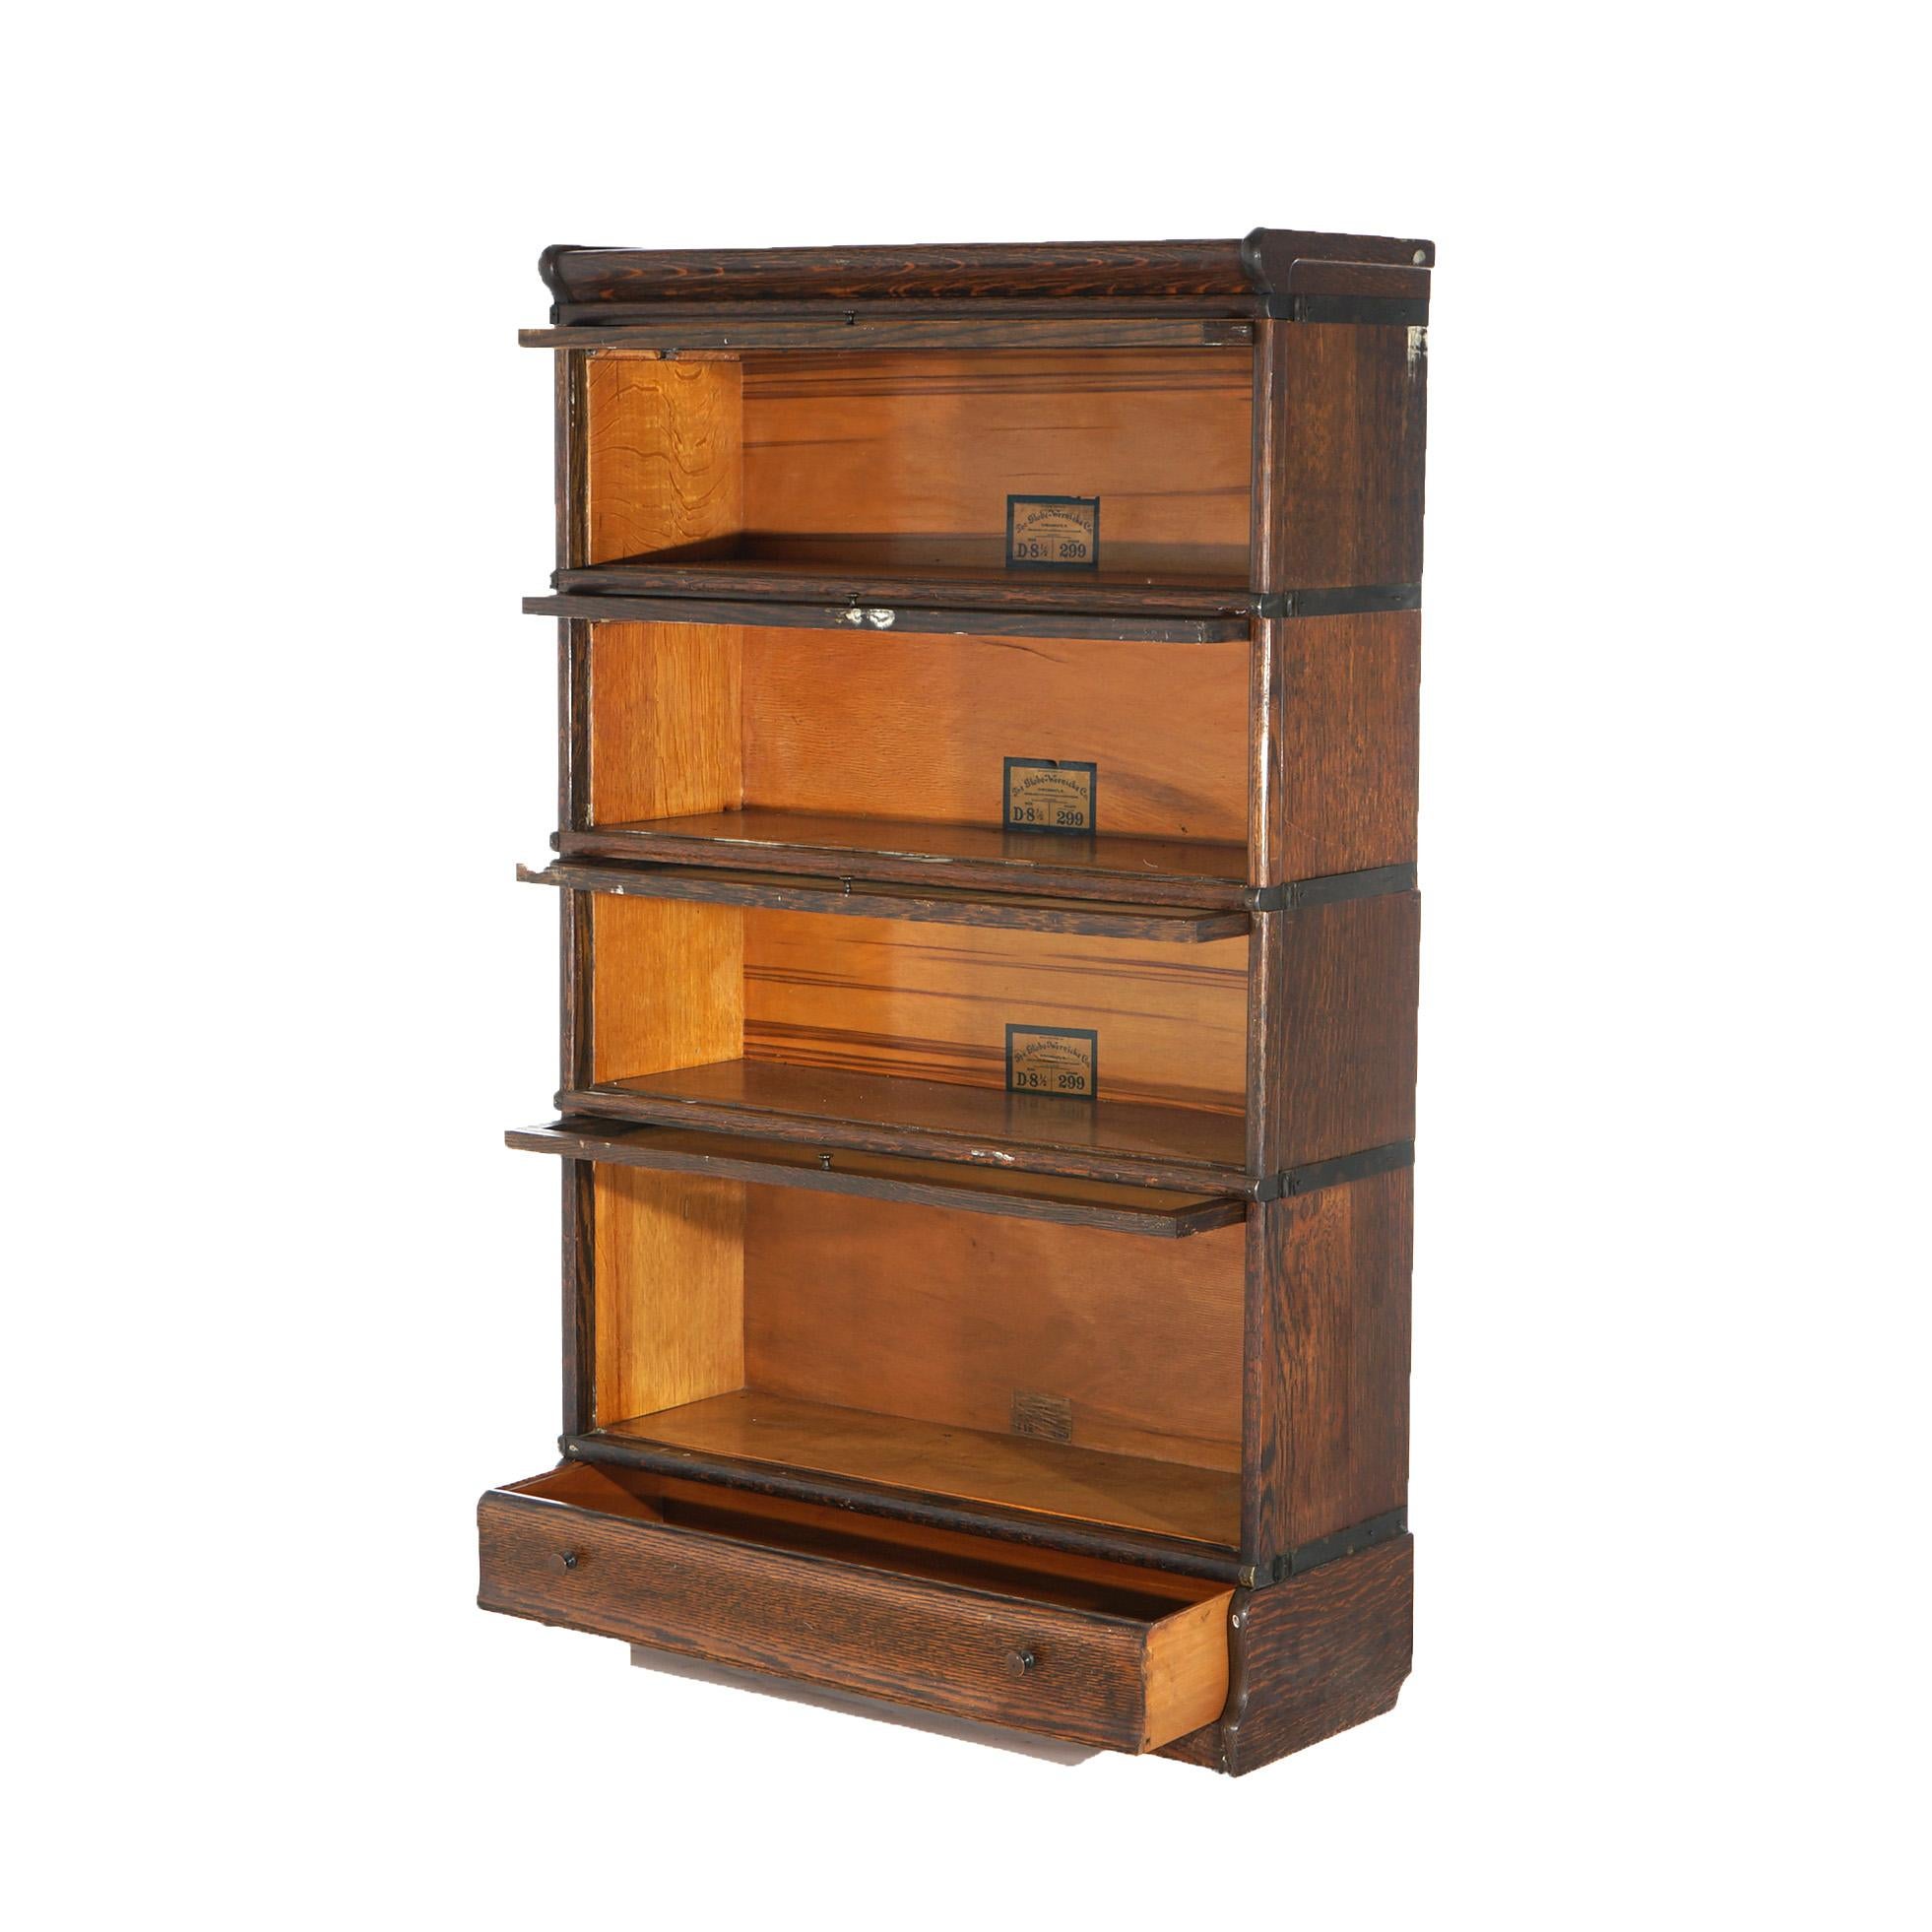 An antique Arts and Crafts barrister bookcase by Globe Wernicke offers quarter sawn oak construction with four stacks, each having pullout glass doors, raised on ogee base, maker labels as photographed, c1910

Measures - Overall 56.25''H x 34''W x